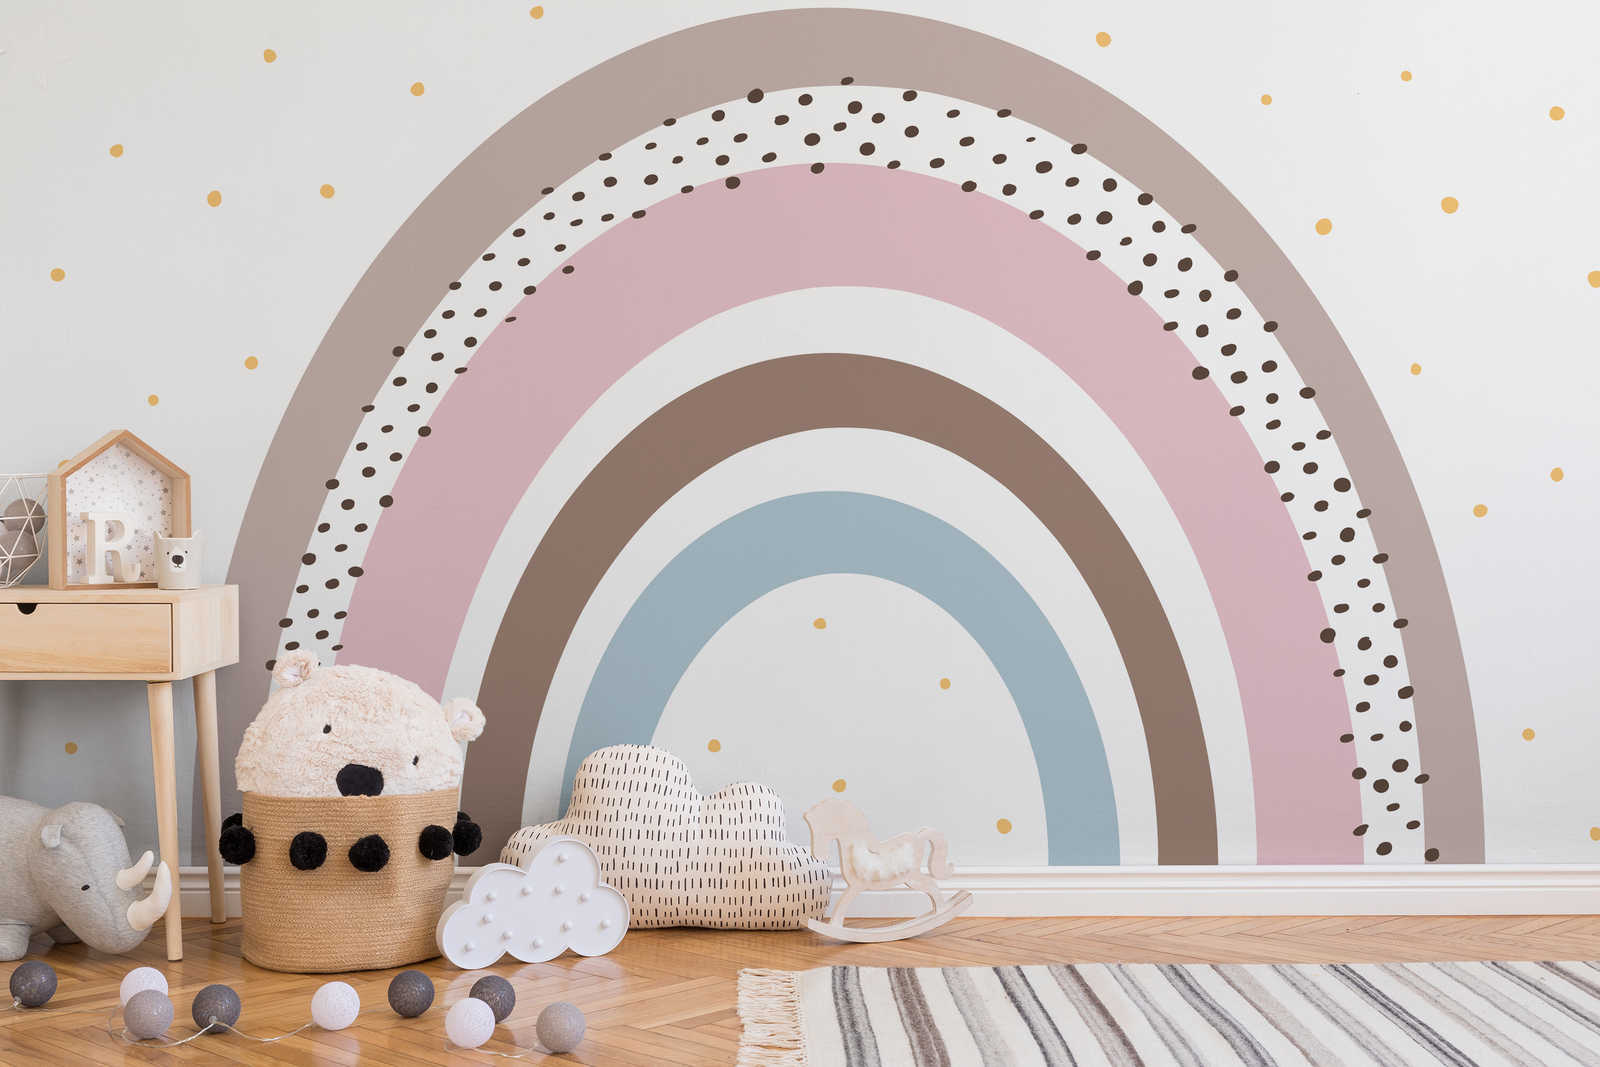             Photo wallpaper rainbow with dots for baby room
        